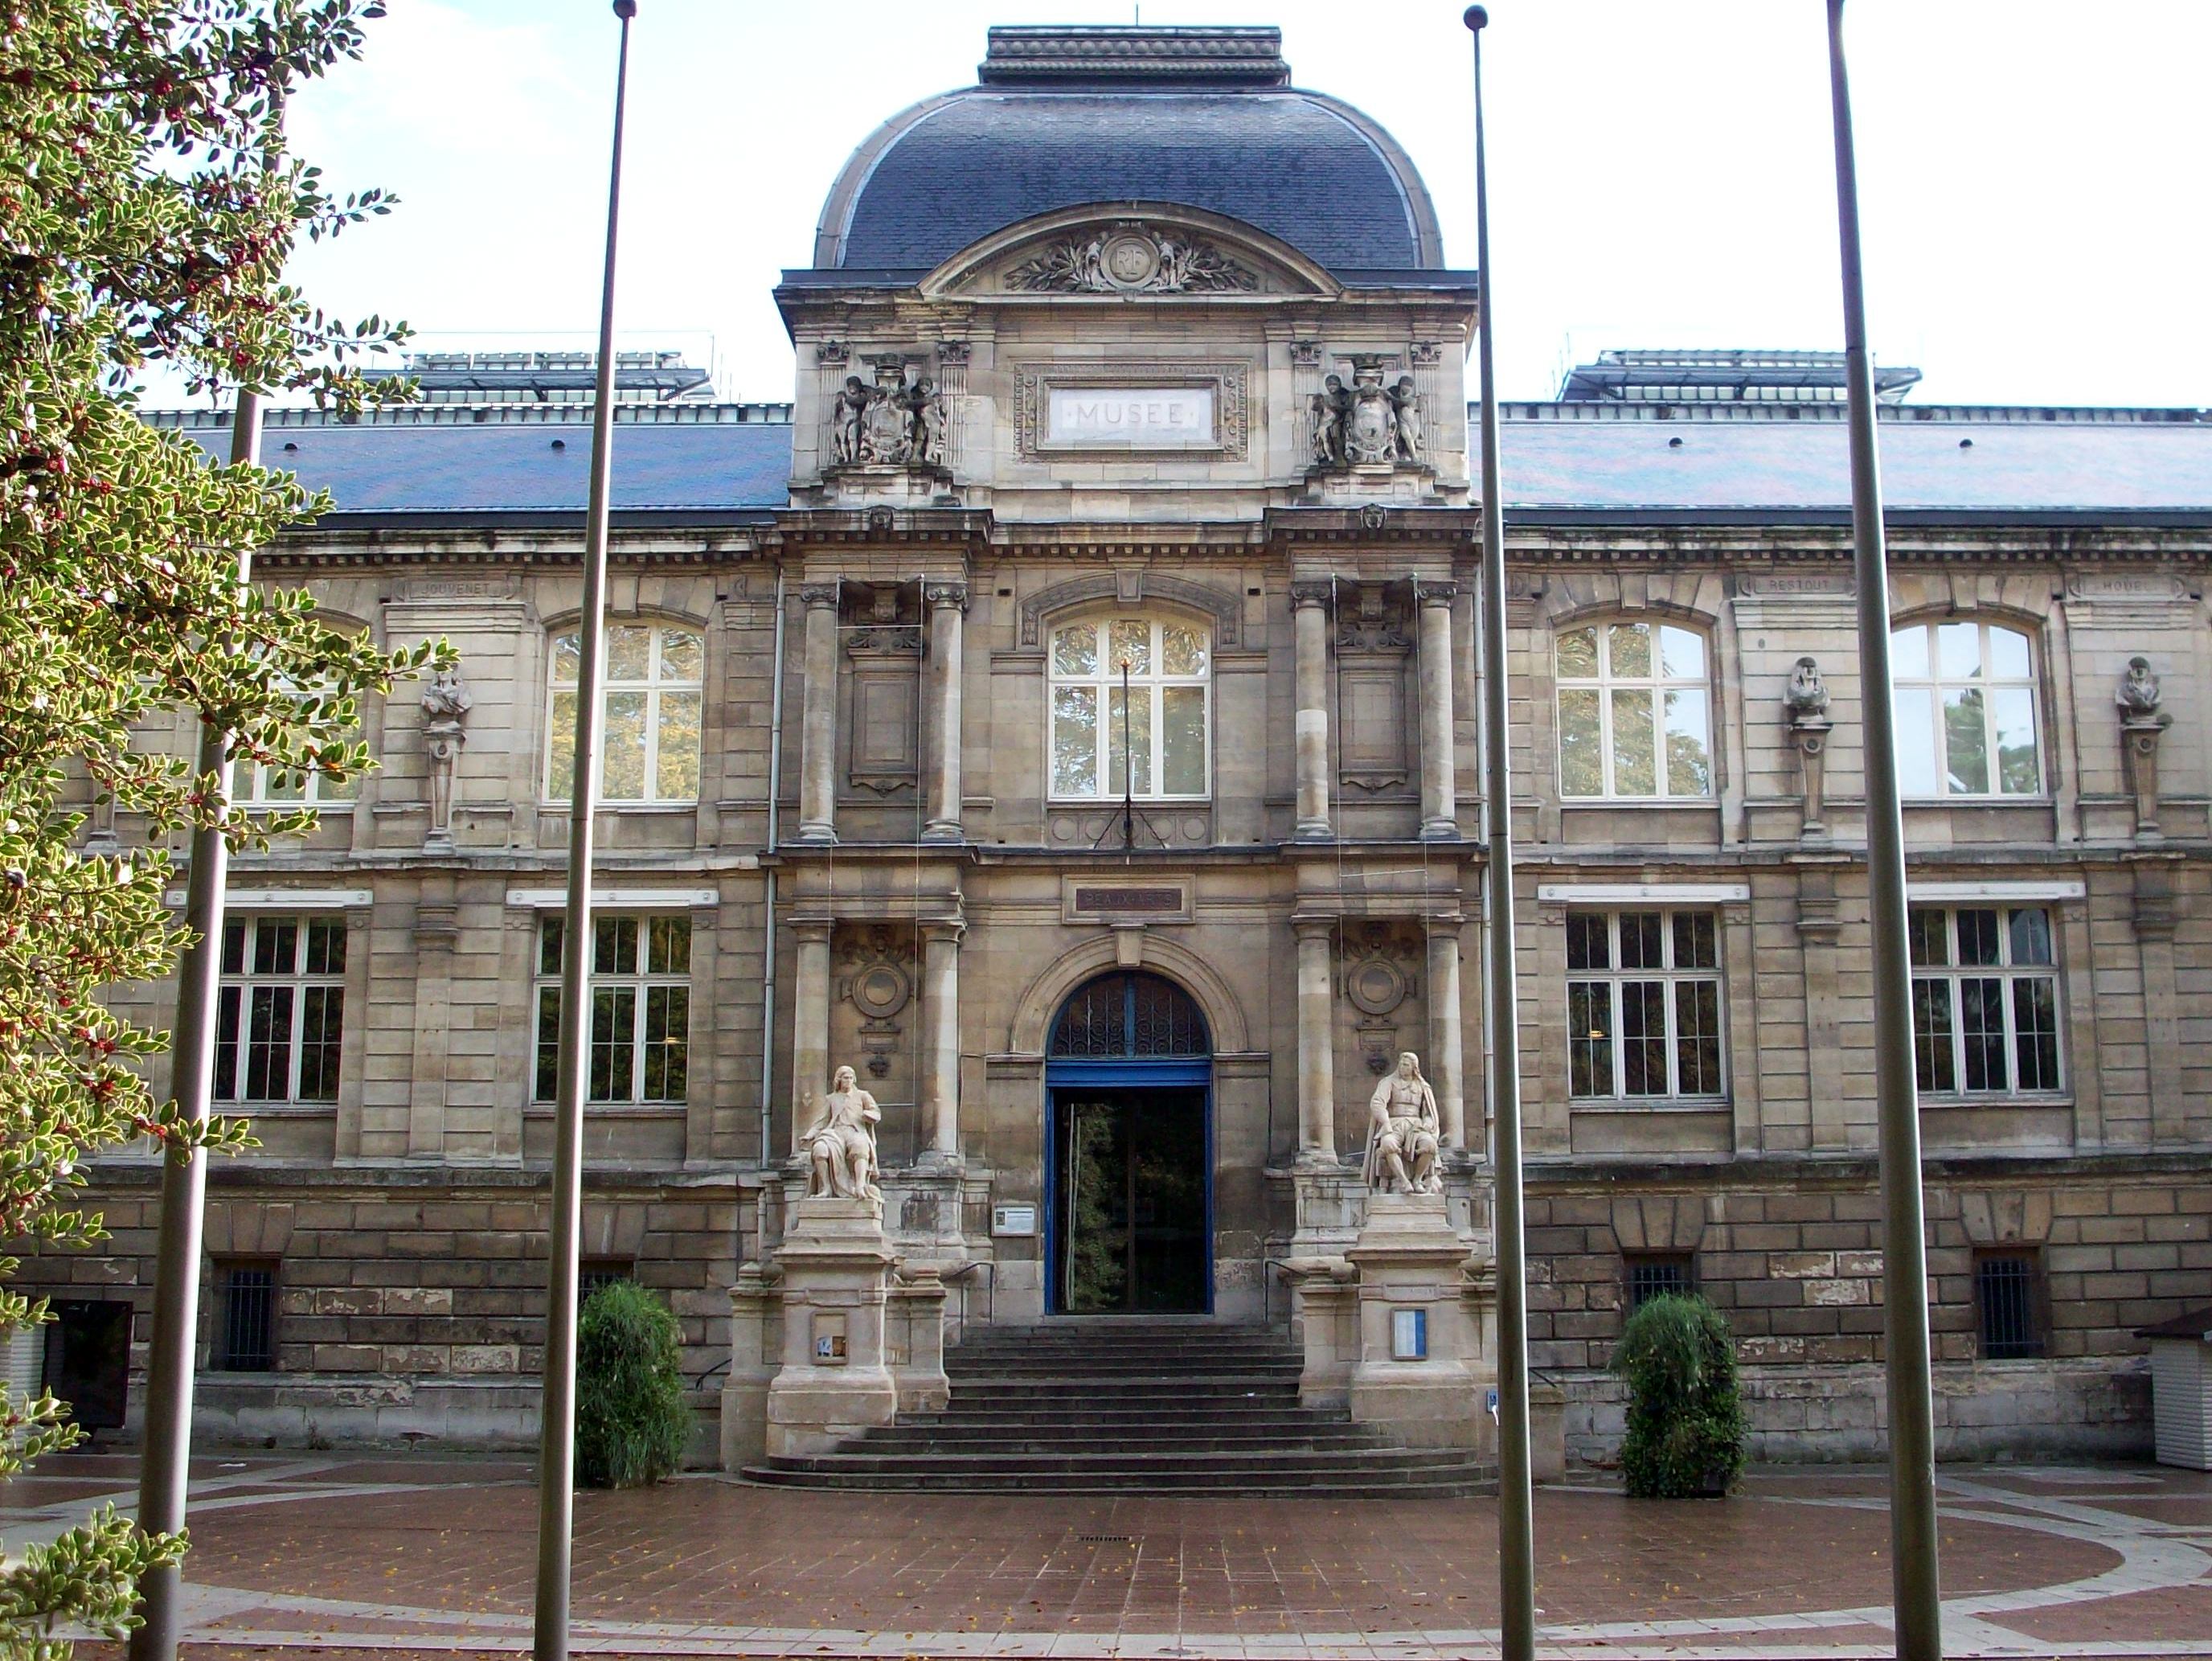 Fine Arts Museum of Rouen © Giogo - licence [CC BY-SA 3.0] from Wikimedia Commons